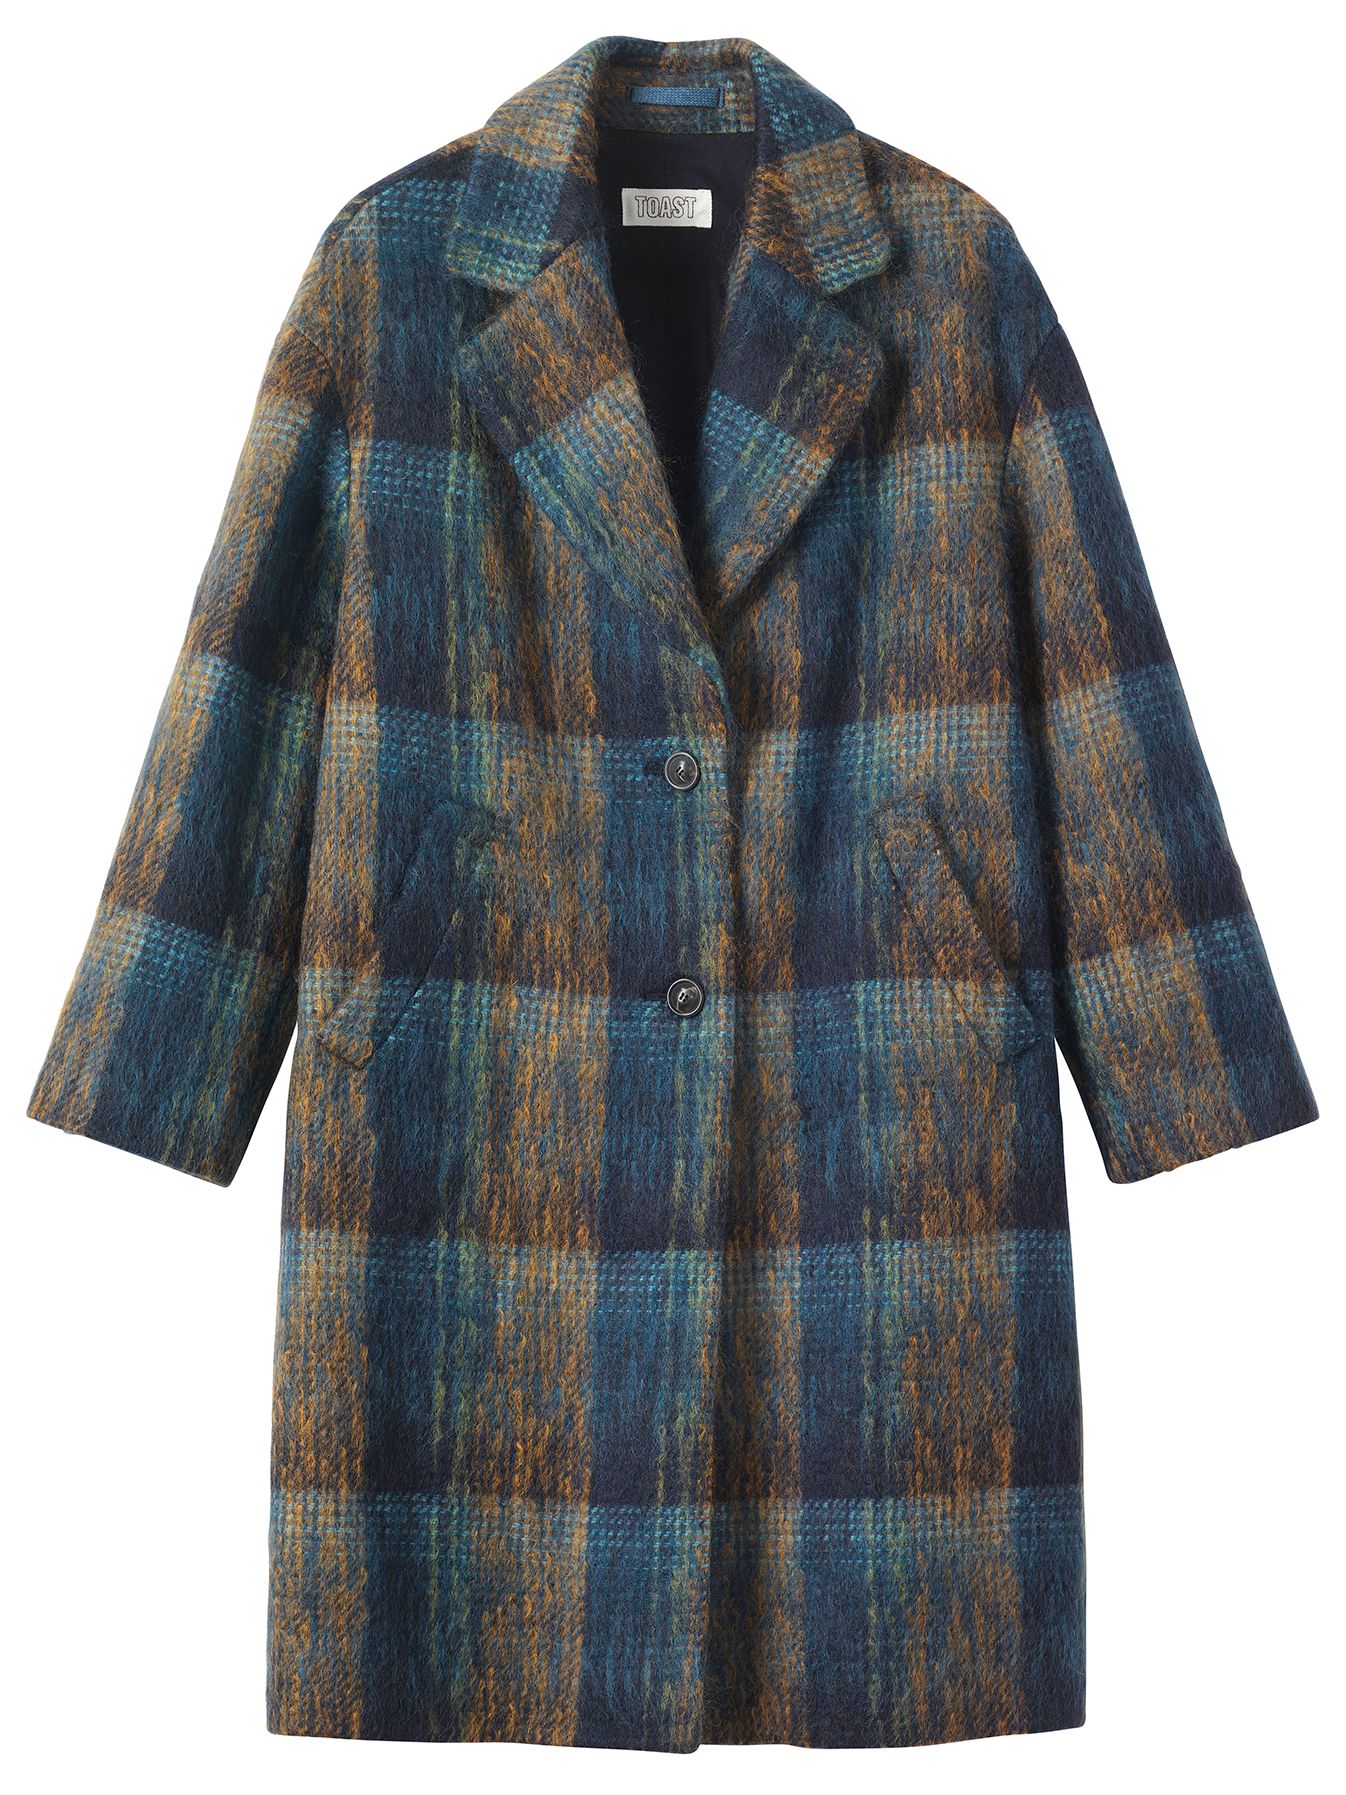 Toast Brushed Wool Mohair Coat, Teal/Ochre at John Lewis & Partners